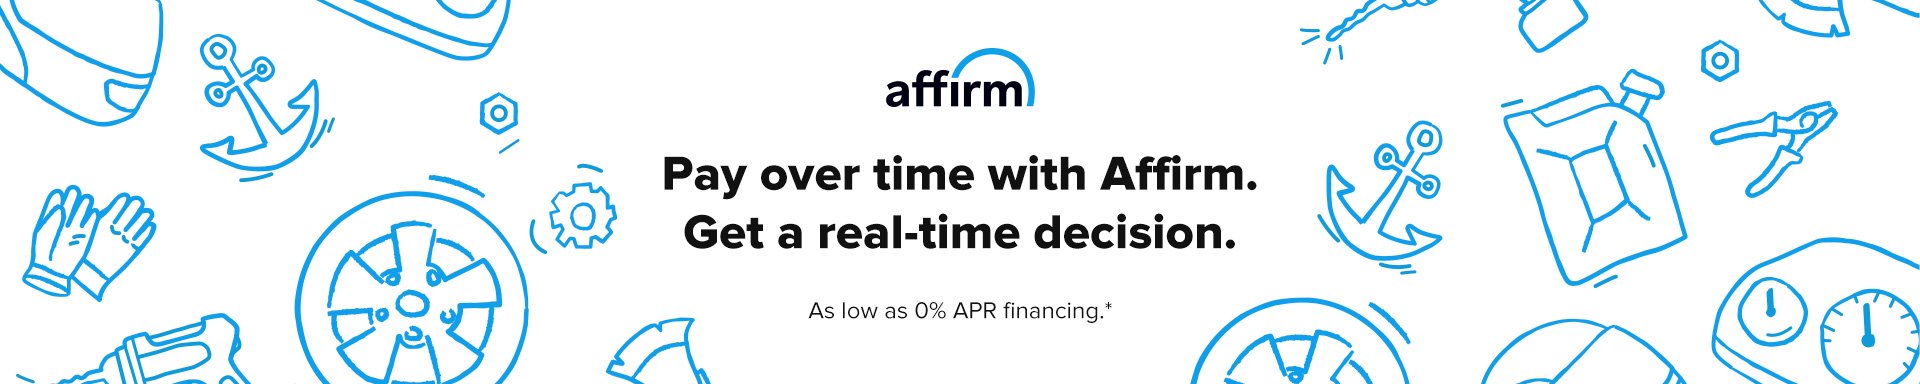 Affirm | Easy Financing | Pay Later with Affirm